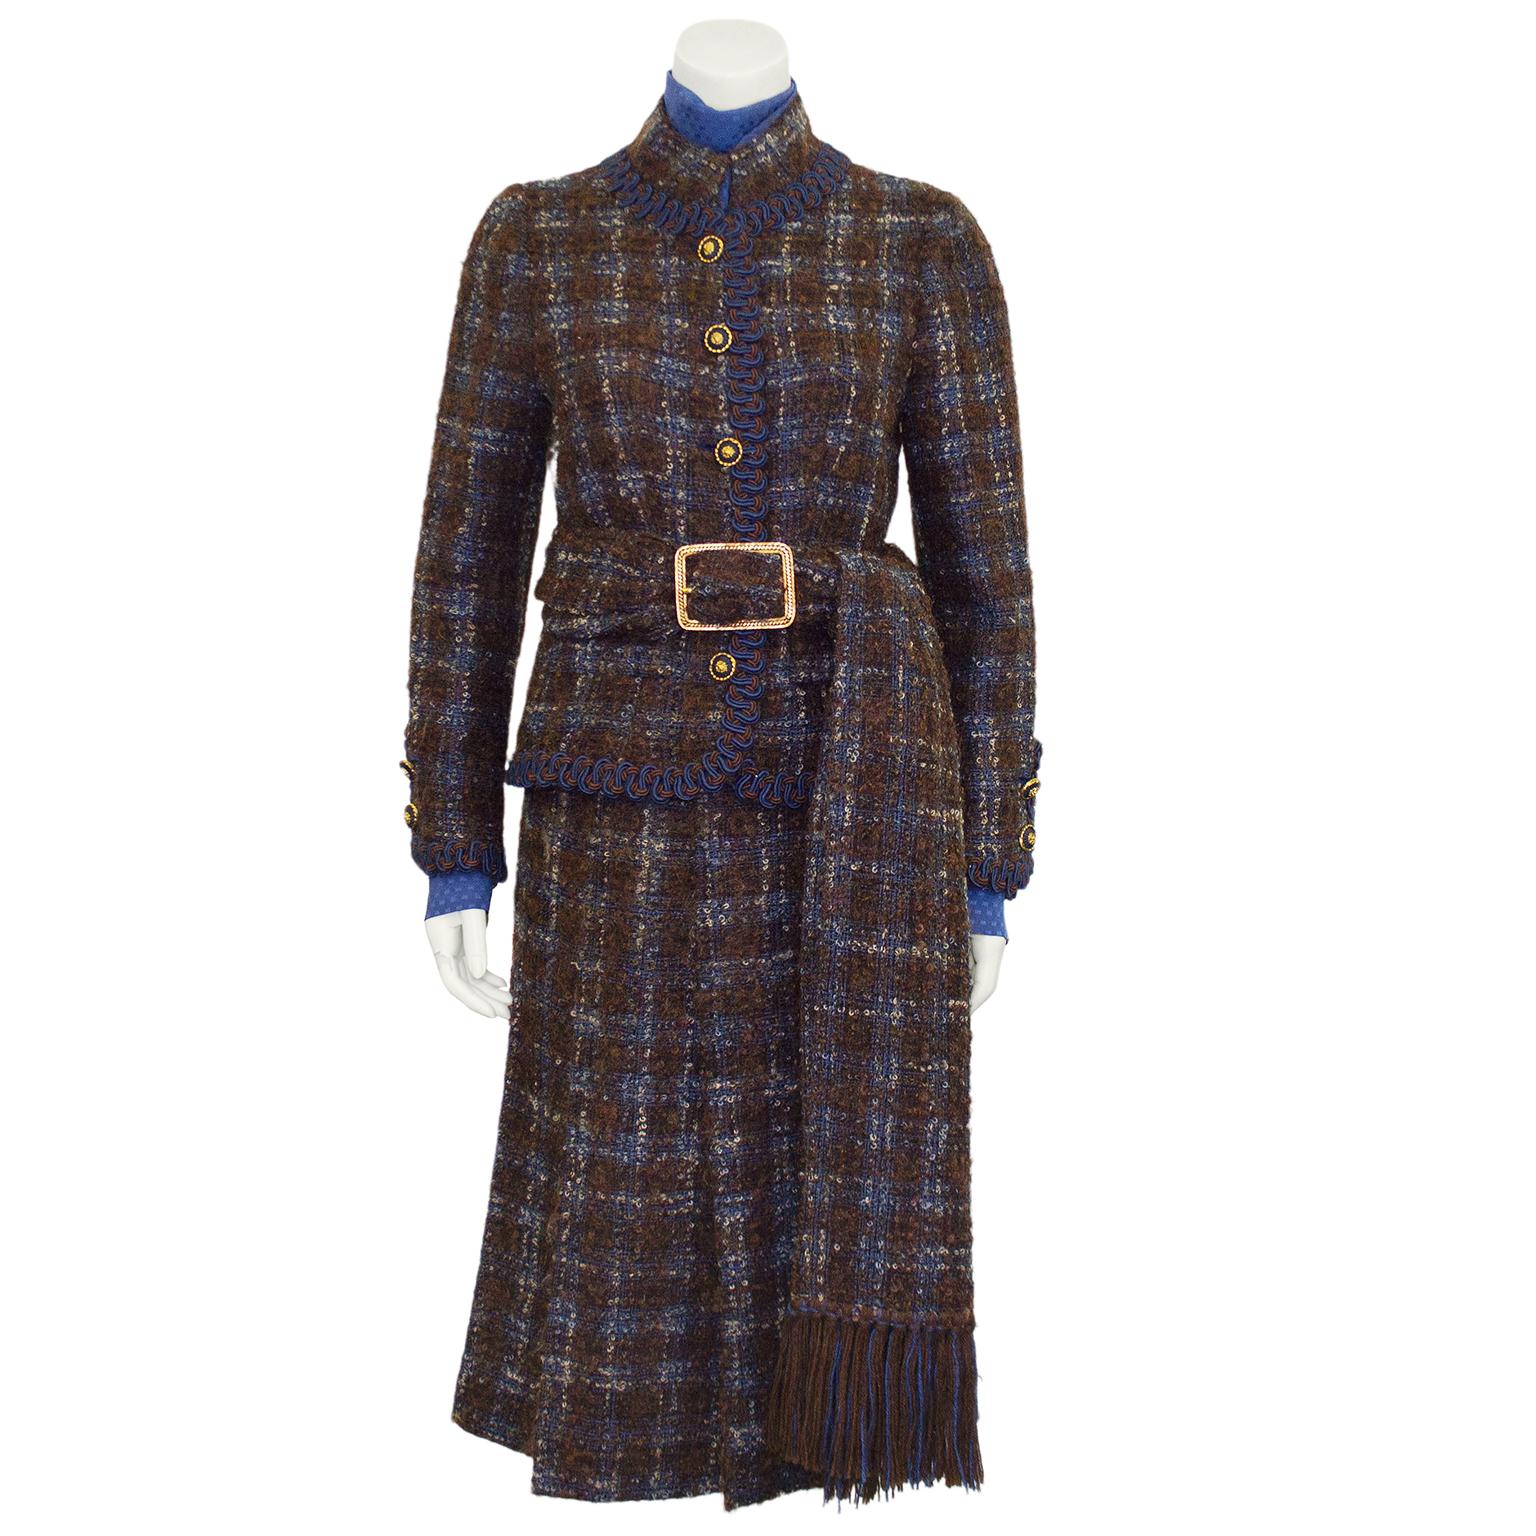 Show stopping 1981 blue and brown tweed Chanel Haute Couture five piece ensemble including a jacket, blouse, cuff links, skirt and scarf/belt. Mandarin collar jacket with patch pockets and blue and brown passementarie trim. Gold and navy blue round